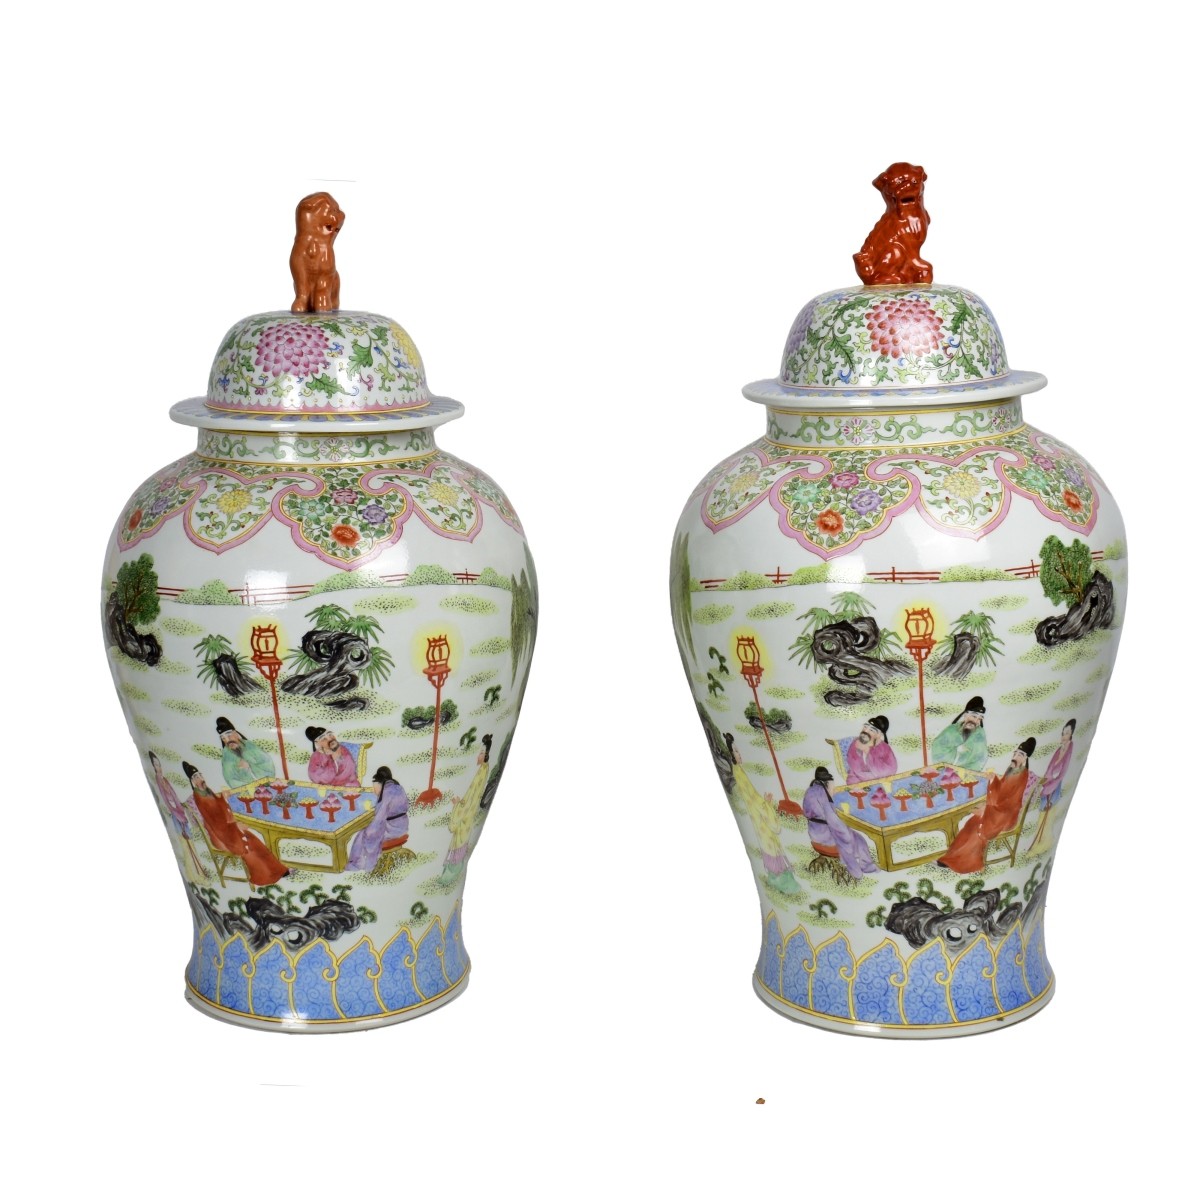 Pair of Large Chinese Covered Jars